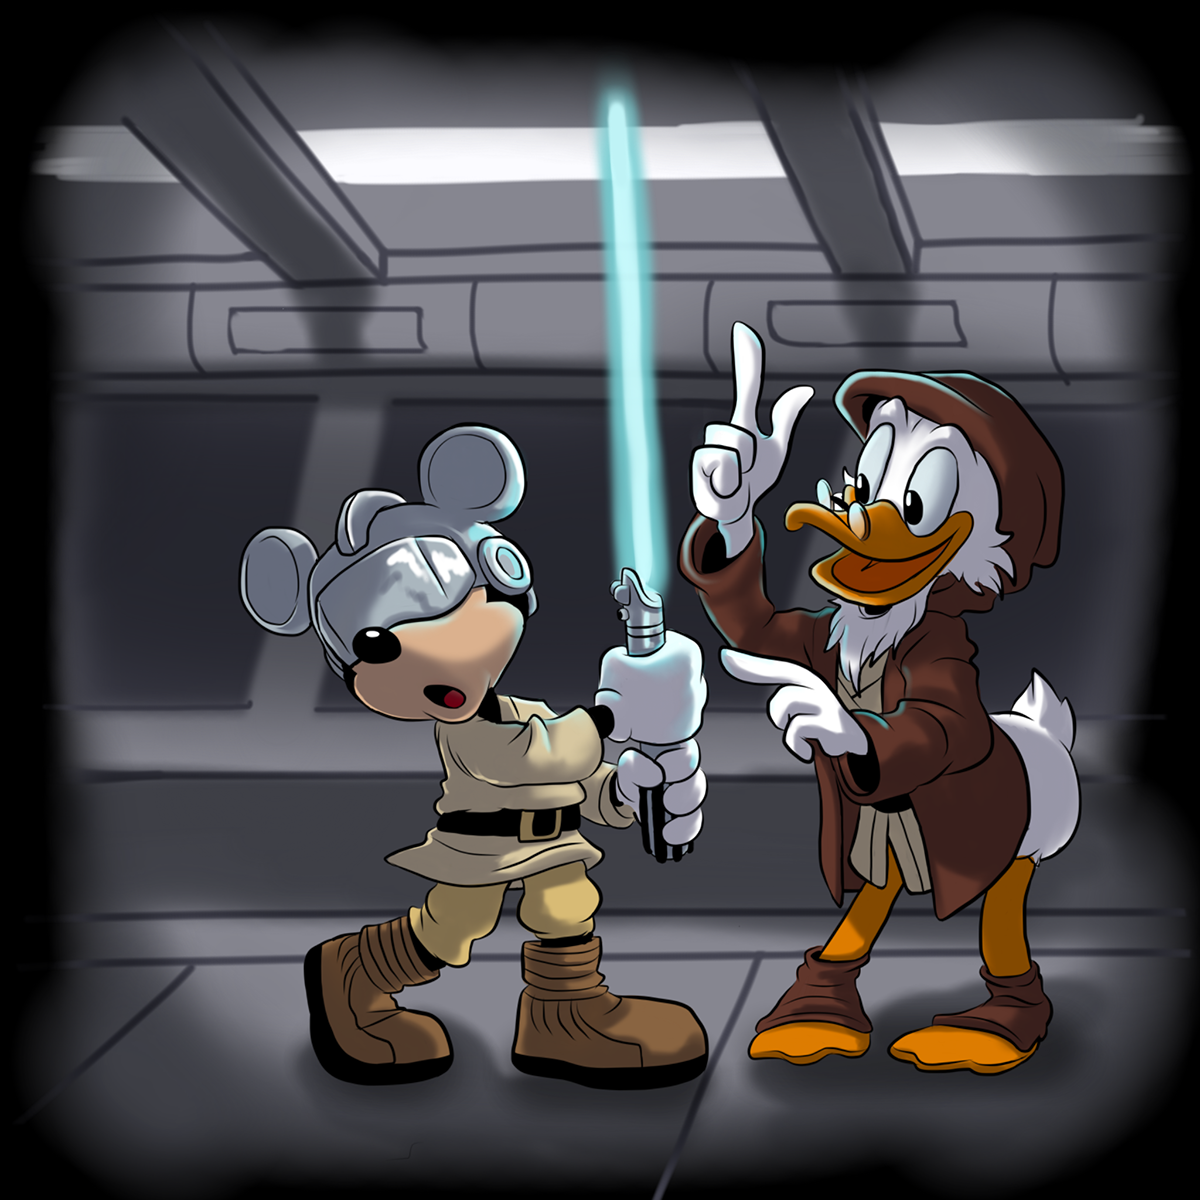 mickey mouse mouse disney Pluto uncle scrooge duck dog cartoon Parody star wars luke force vader darth vader